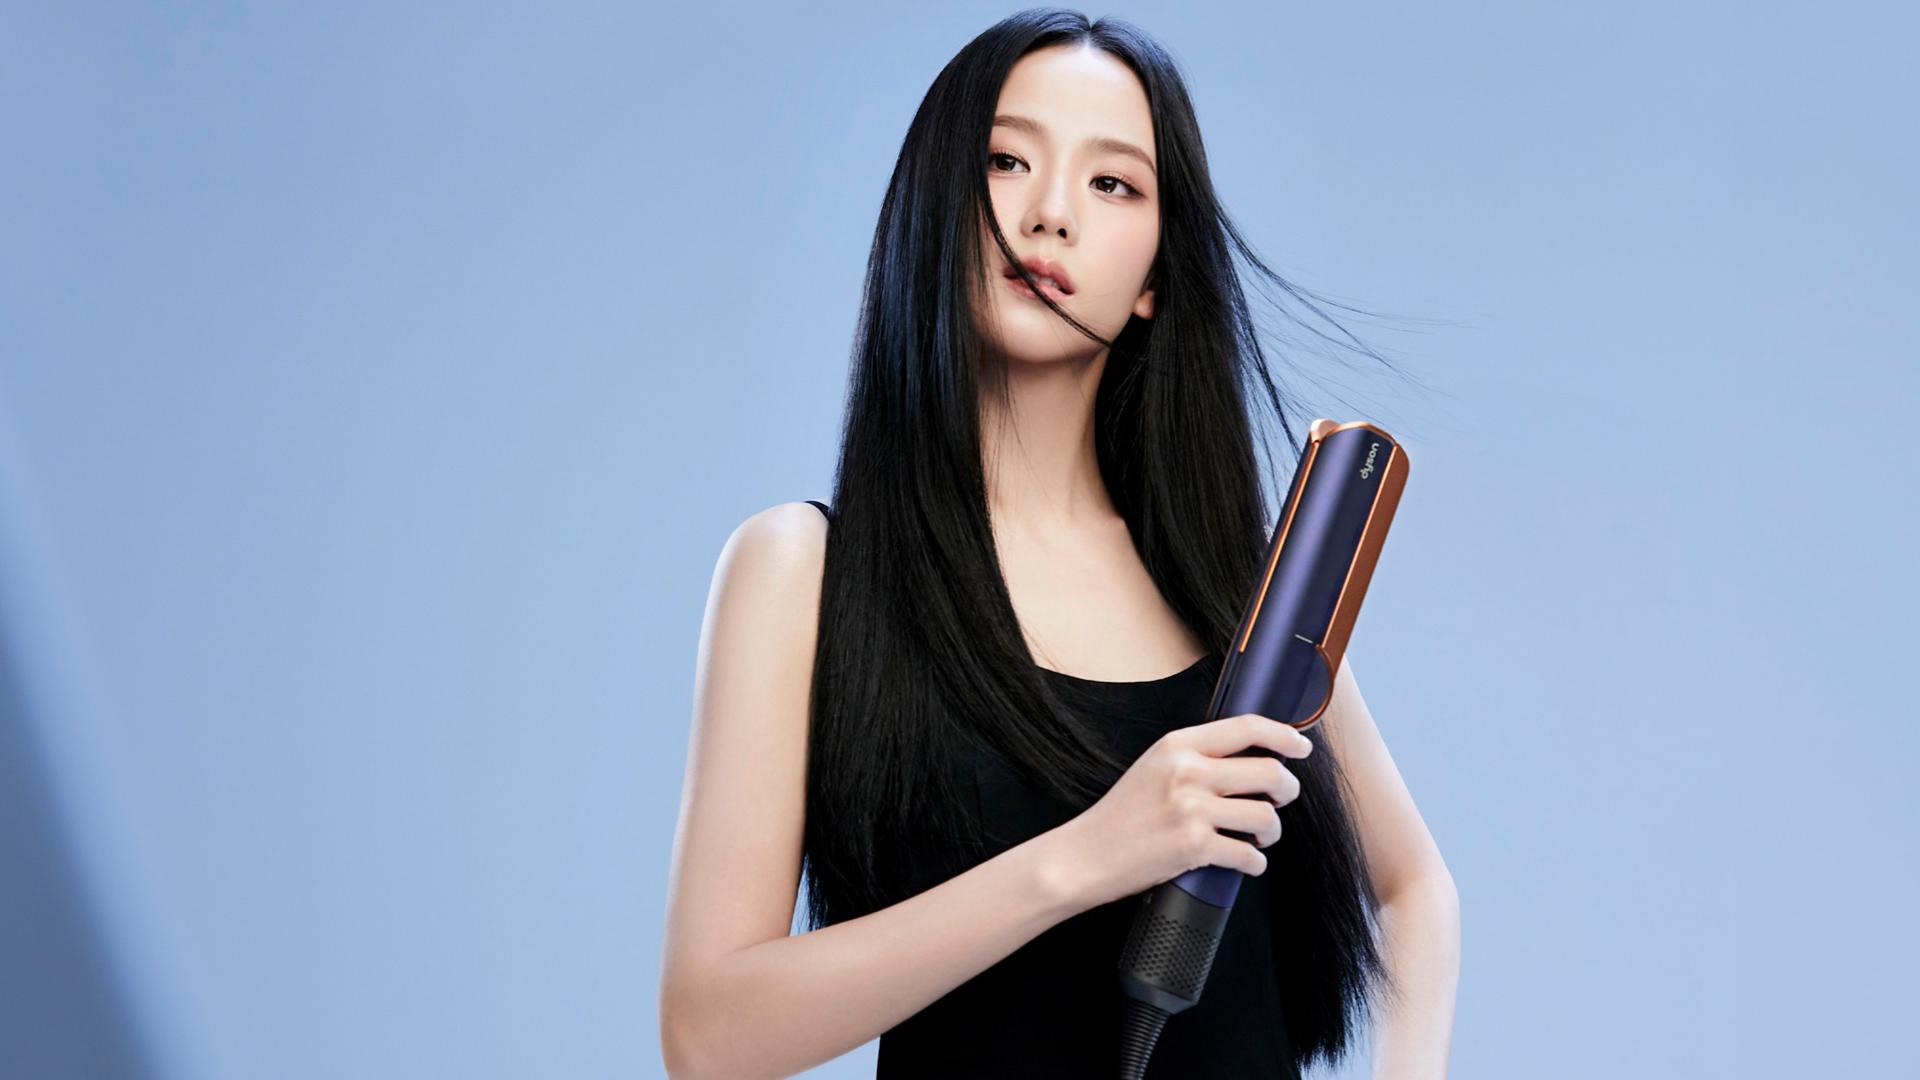 JISOO using a Dyson Airstrait straightener to dry and straighten a tress of her hair.